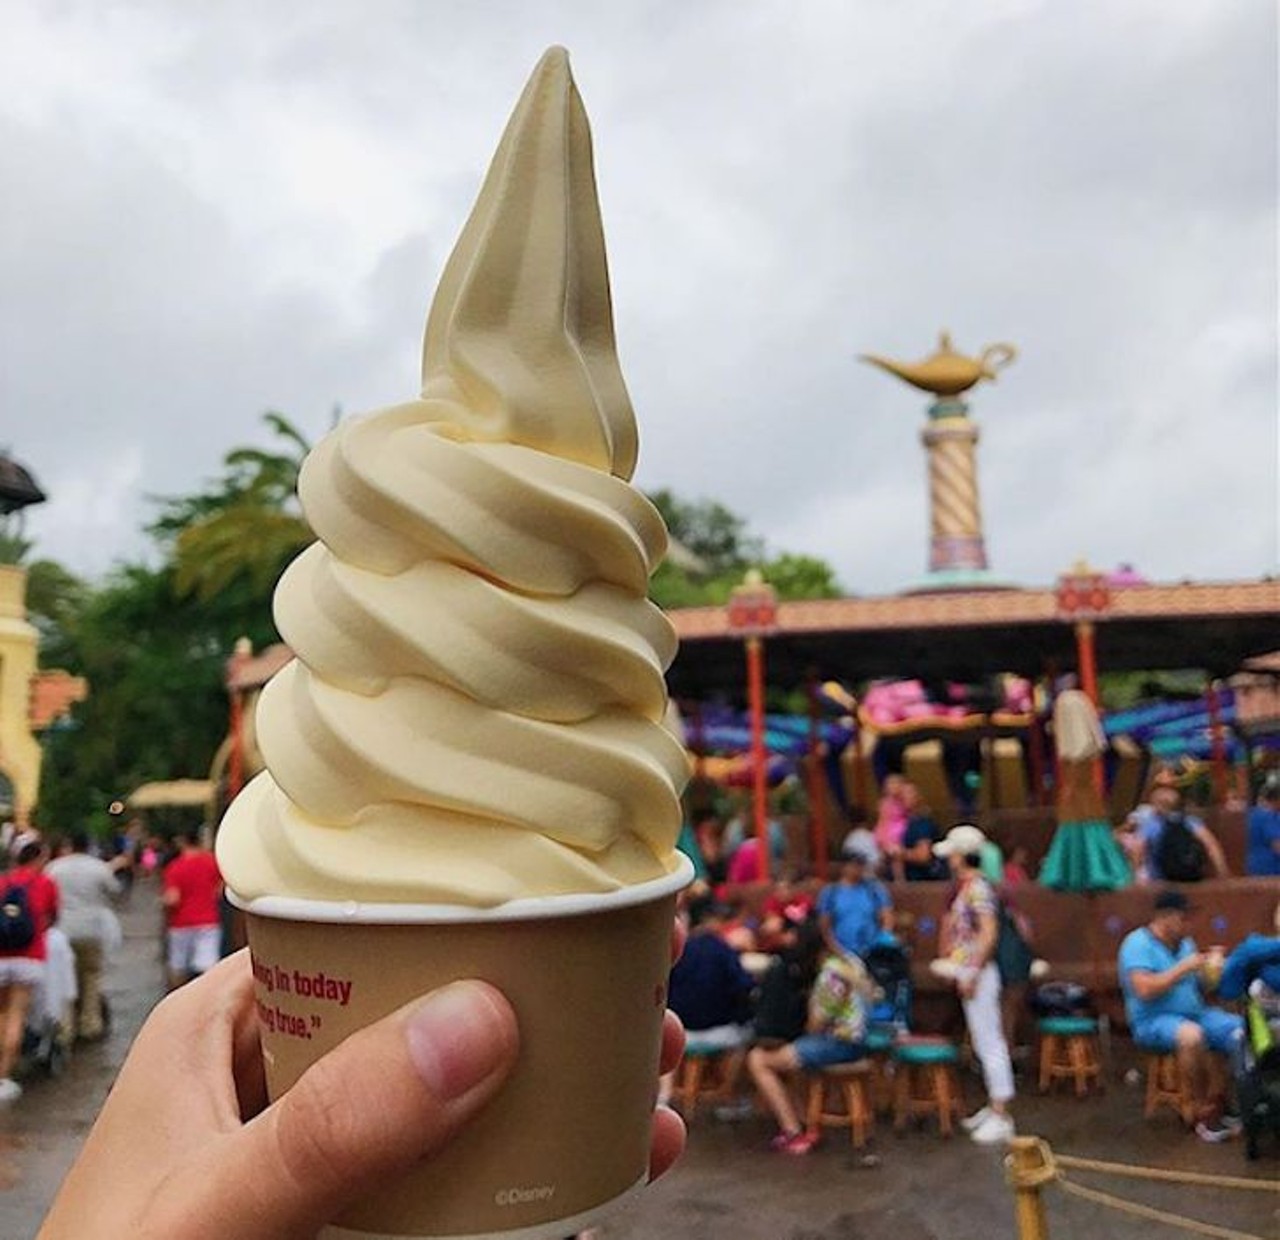 Best Thing to Eat at a Theme Park
1. Dole Whip, at Disney, disneyworld.disney.go.com 
2. Butter Beer, at Universal, universalorlando.com
3. Turkey Leg, at Disney, disneyworld.disney.go.com
Photo via kktravelsandeats/Instagram